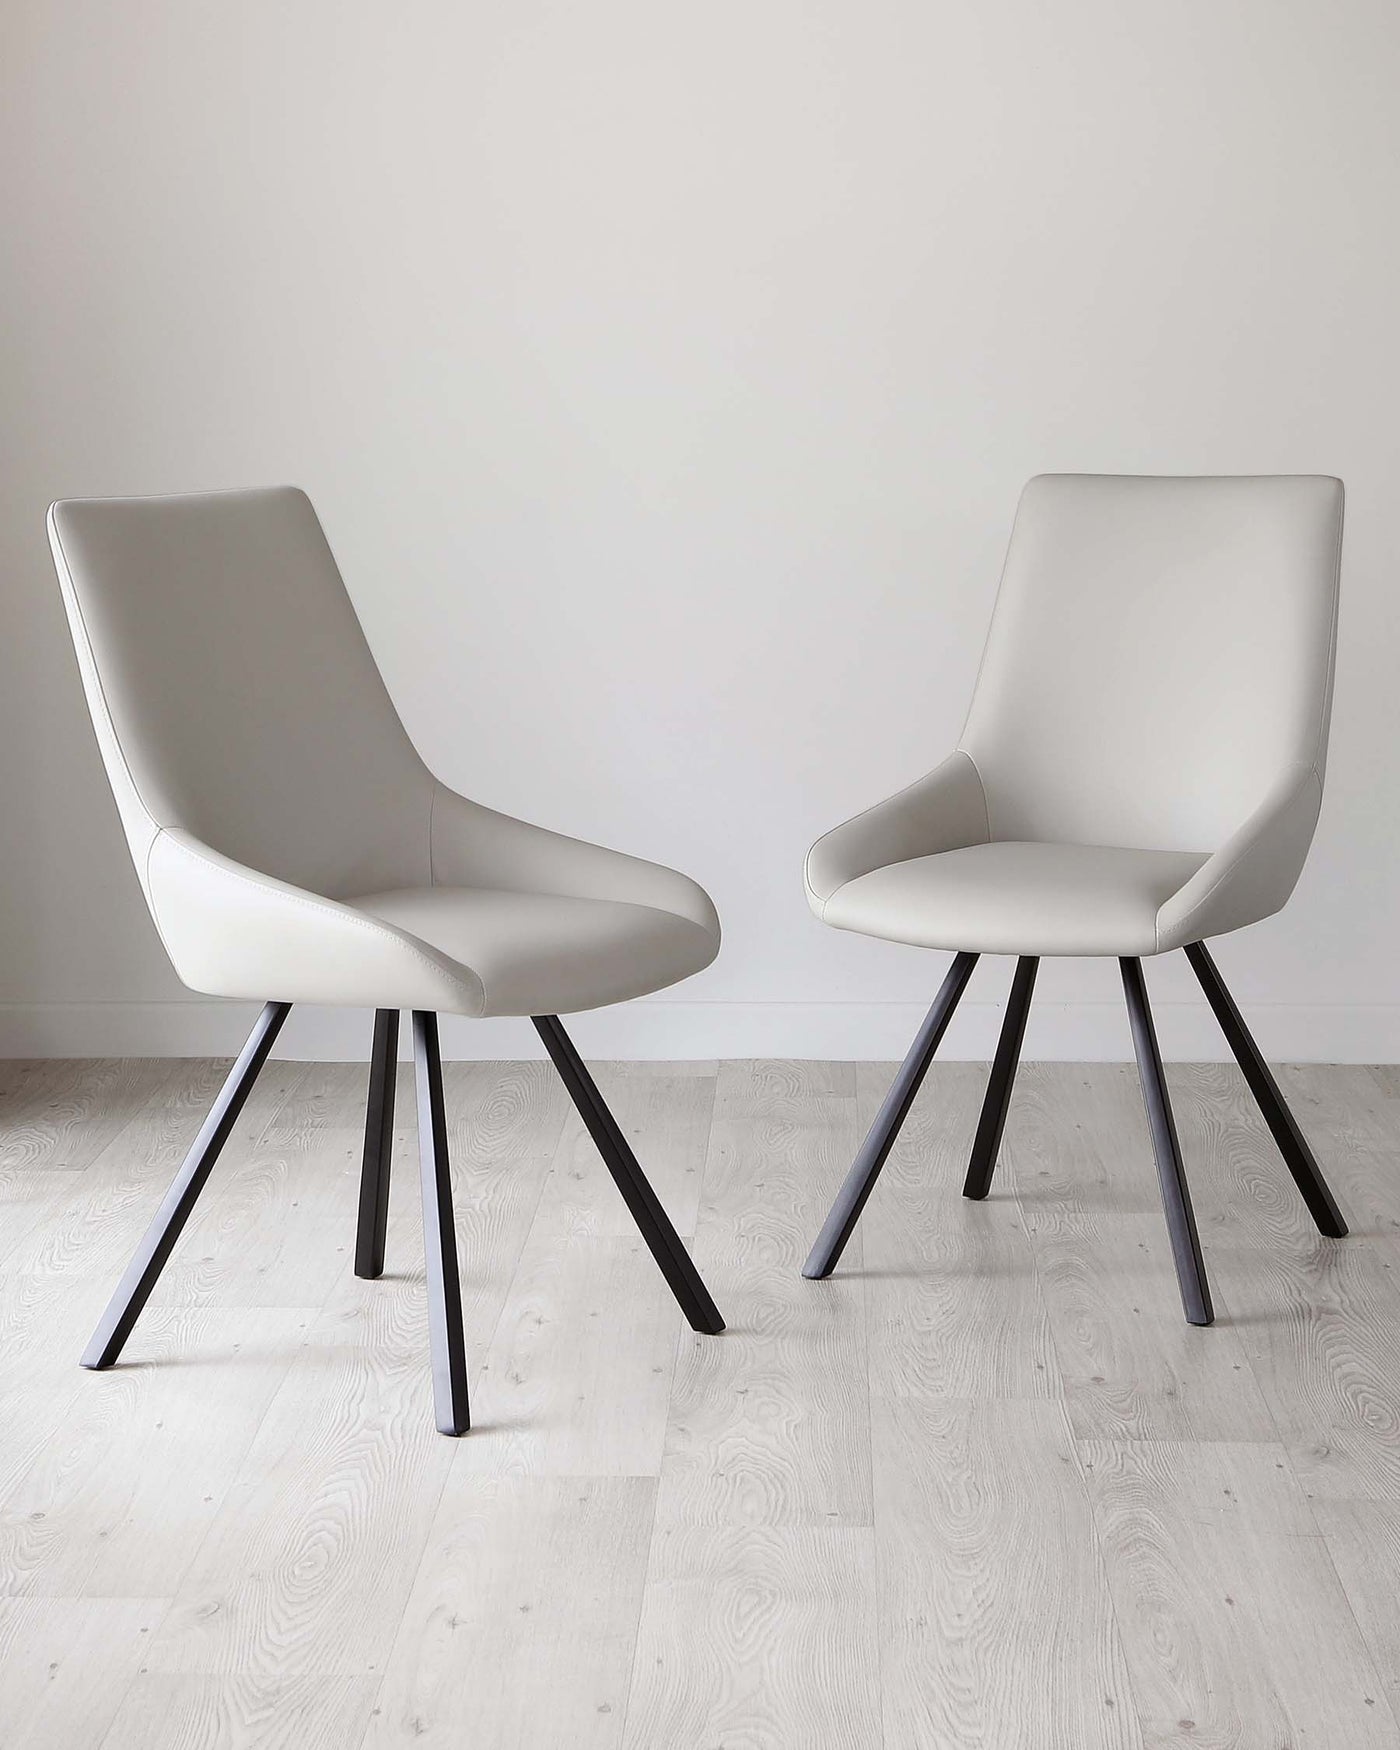 Two modern dining chairs with sleek, light grey upholstery and black metal legs, positioned on a herringbone-patterned light wooden floor against a clean white background.